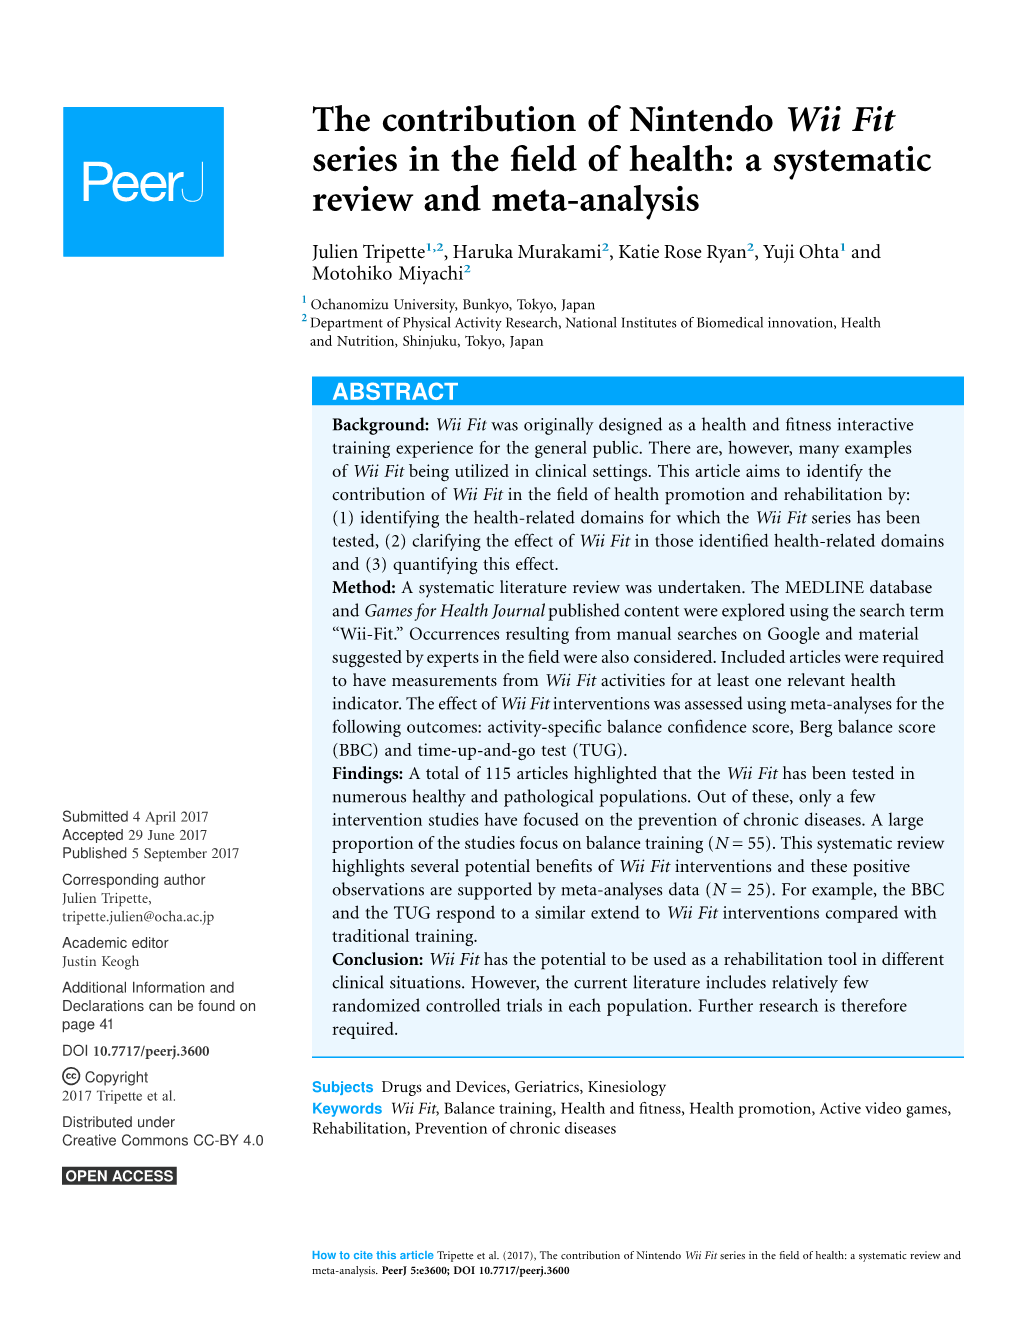 The Contribution of Nintendo Wii Fit Series in the ﬁeld of Health: a Systematic Review and Meta-Analysis